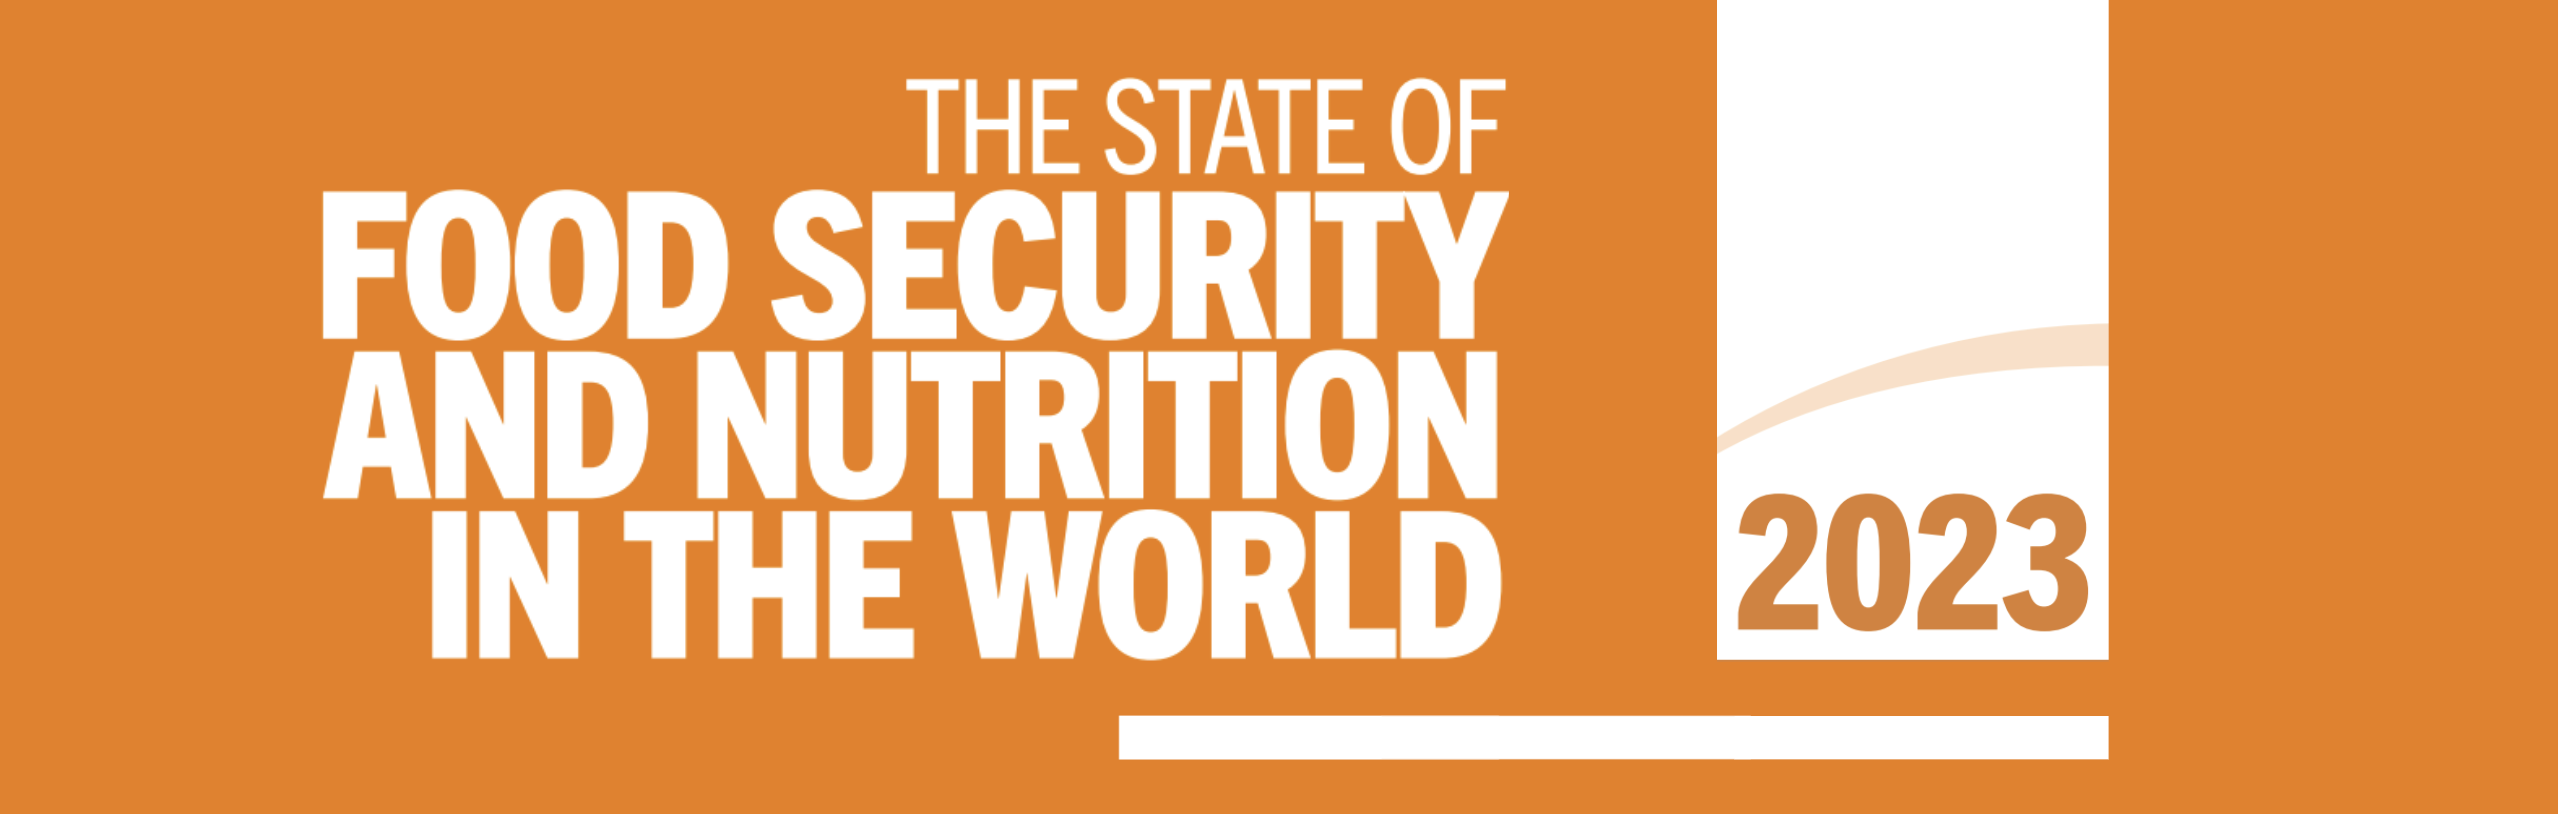 Launch of the State of Food Security and Nutrition in the World 2023